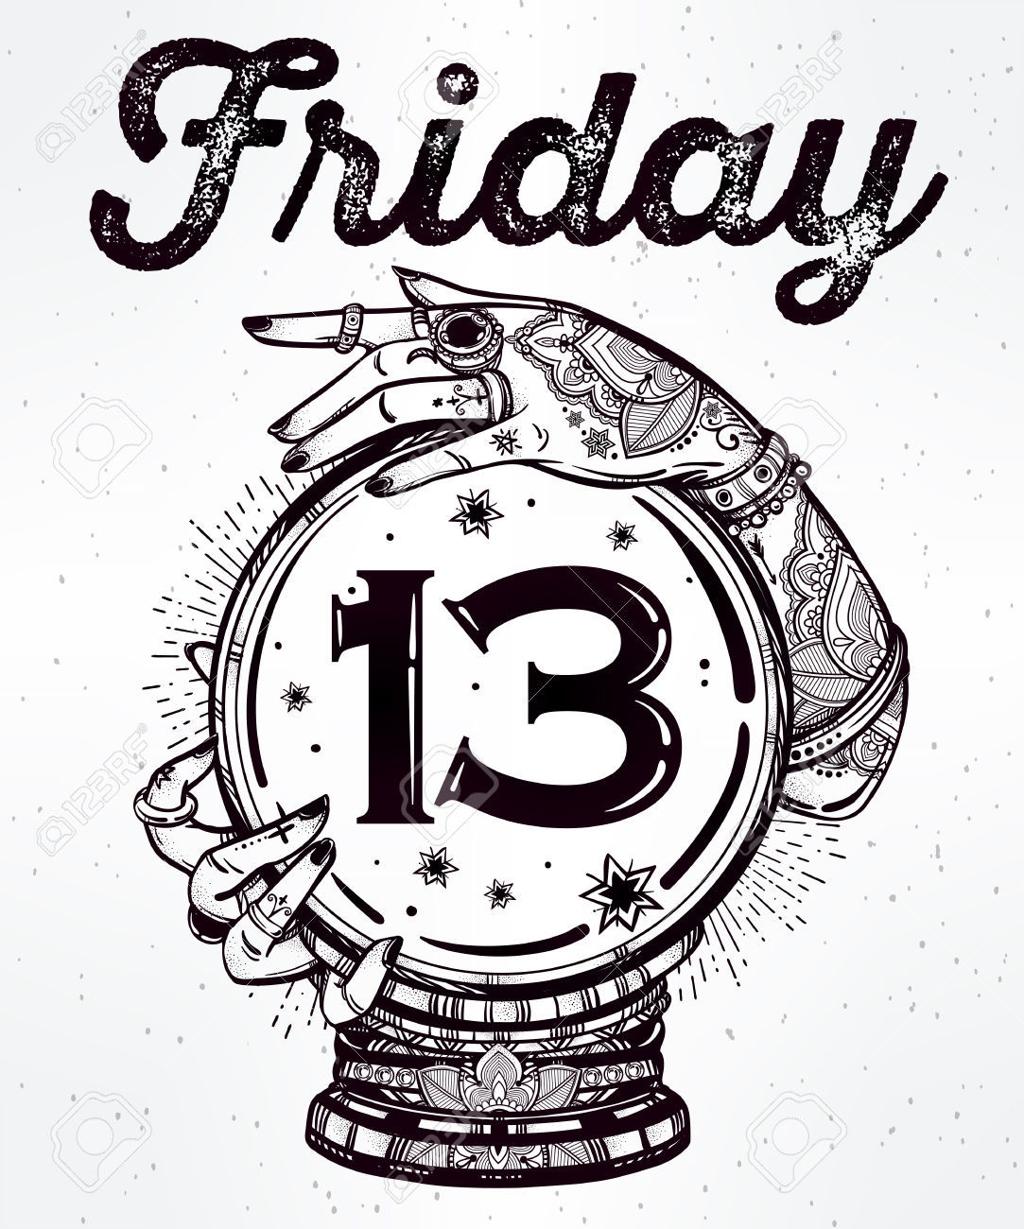 Friday the 13th: Origins & Meaning of Friday the 13th Superstition